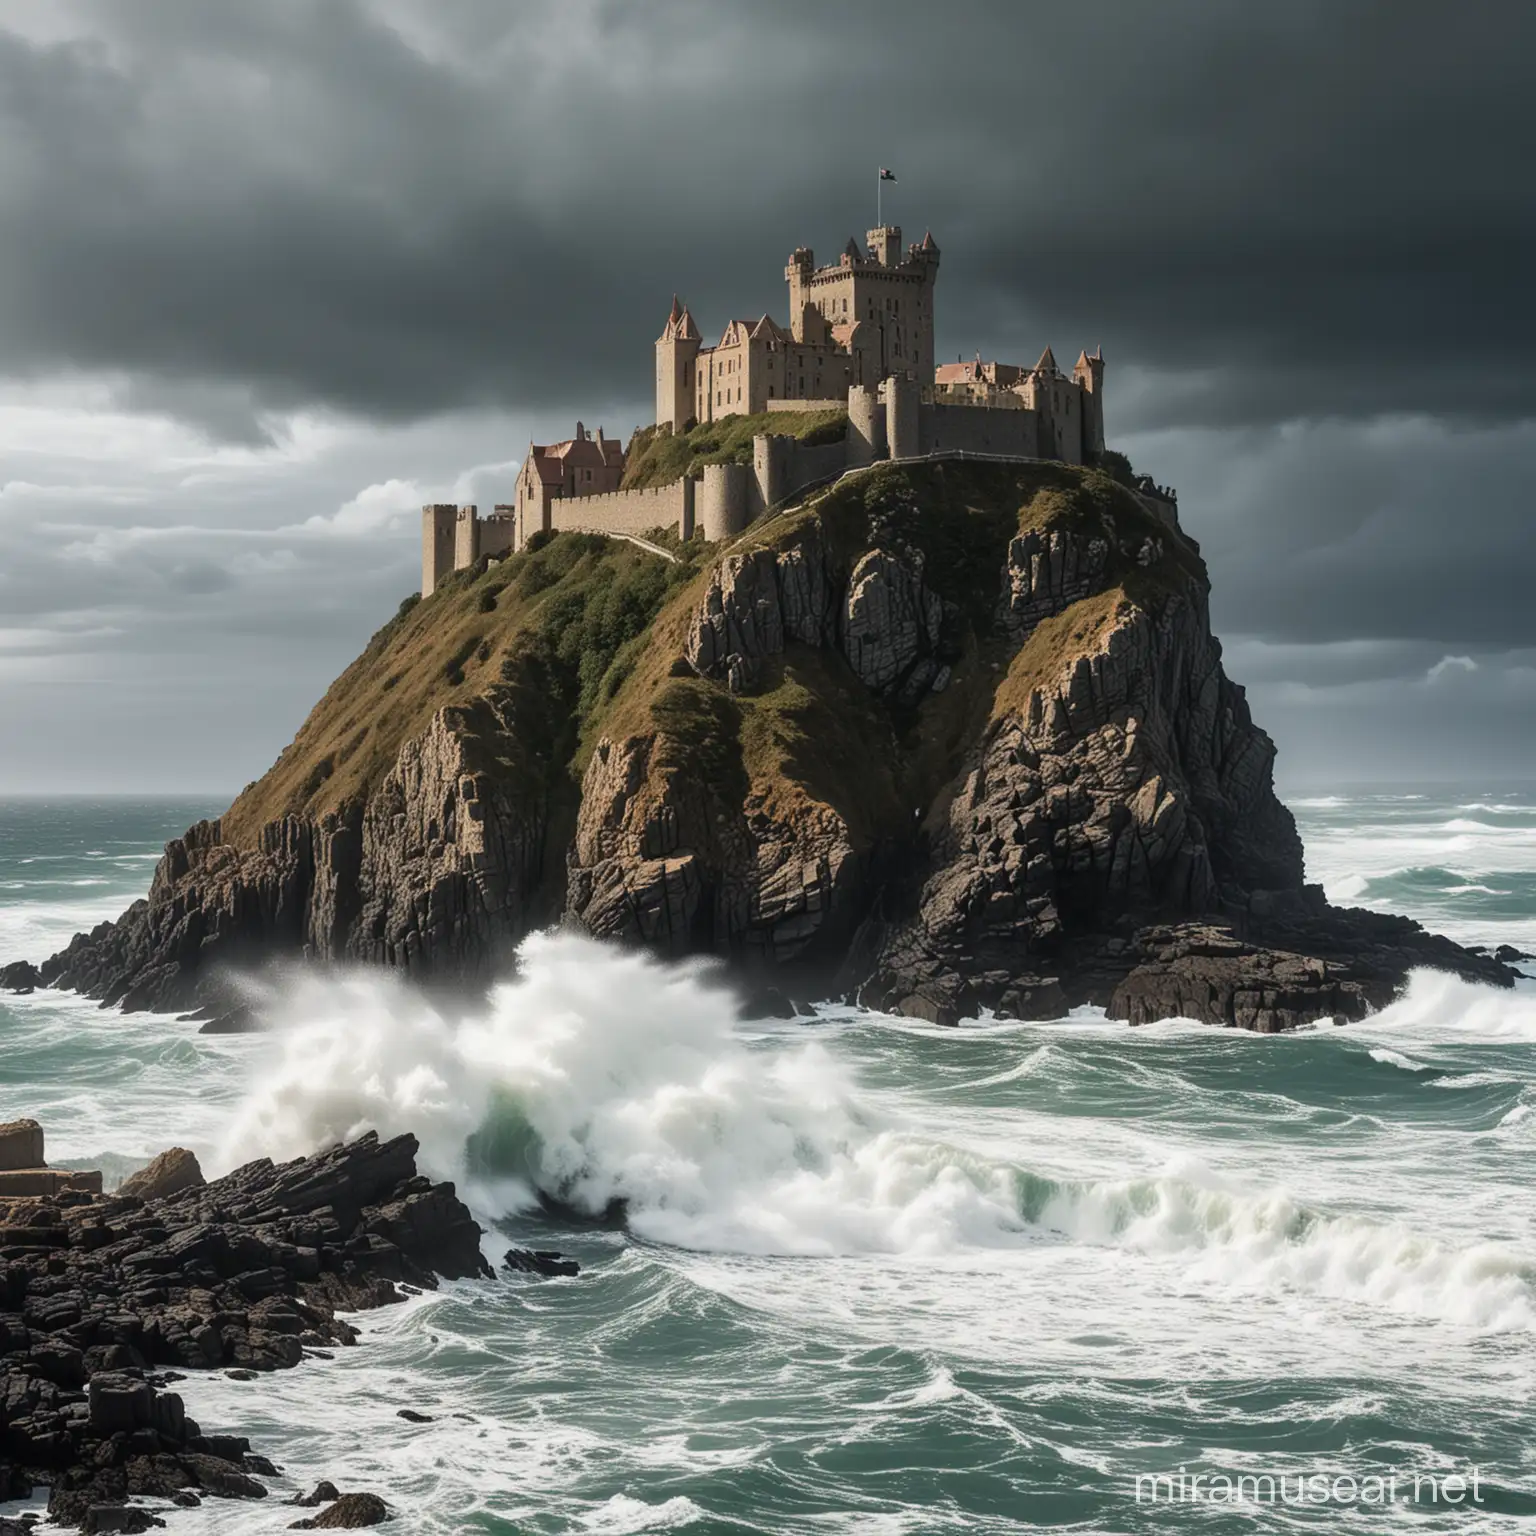 Stormy Ocean Castle Majestic Fortress Perched on Rocky Bluff Amidst Waves